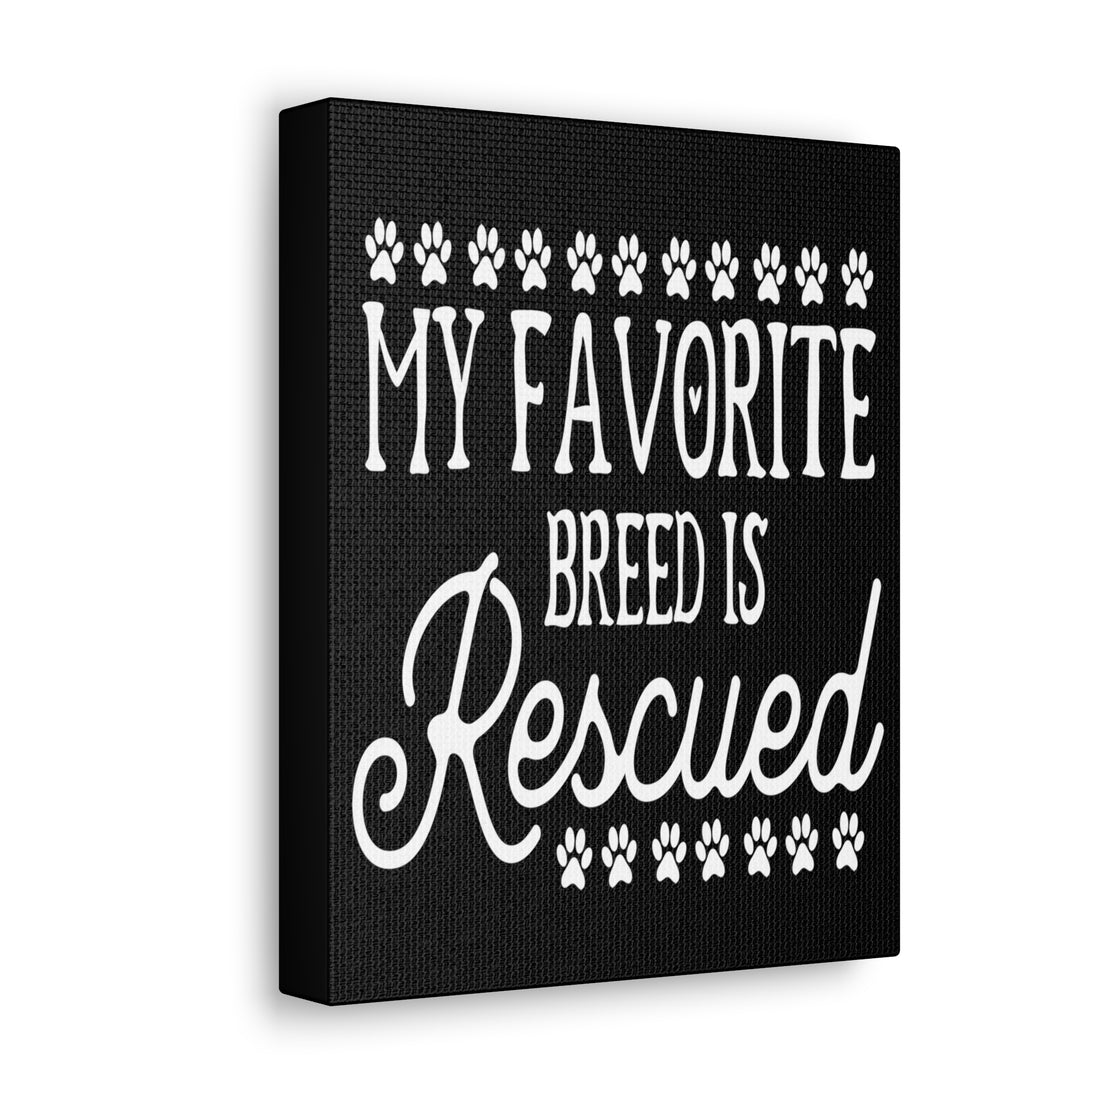 My Favorite Breed Is Rescued - Canvass Print